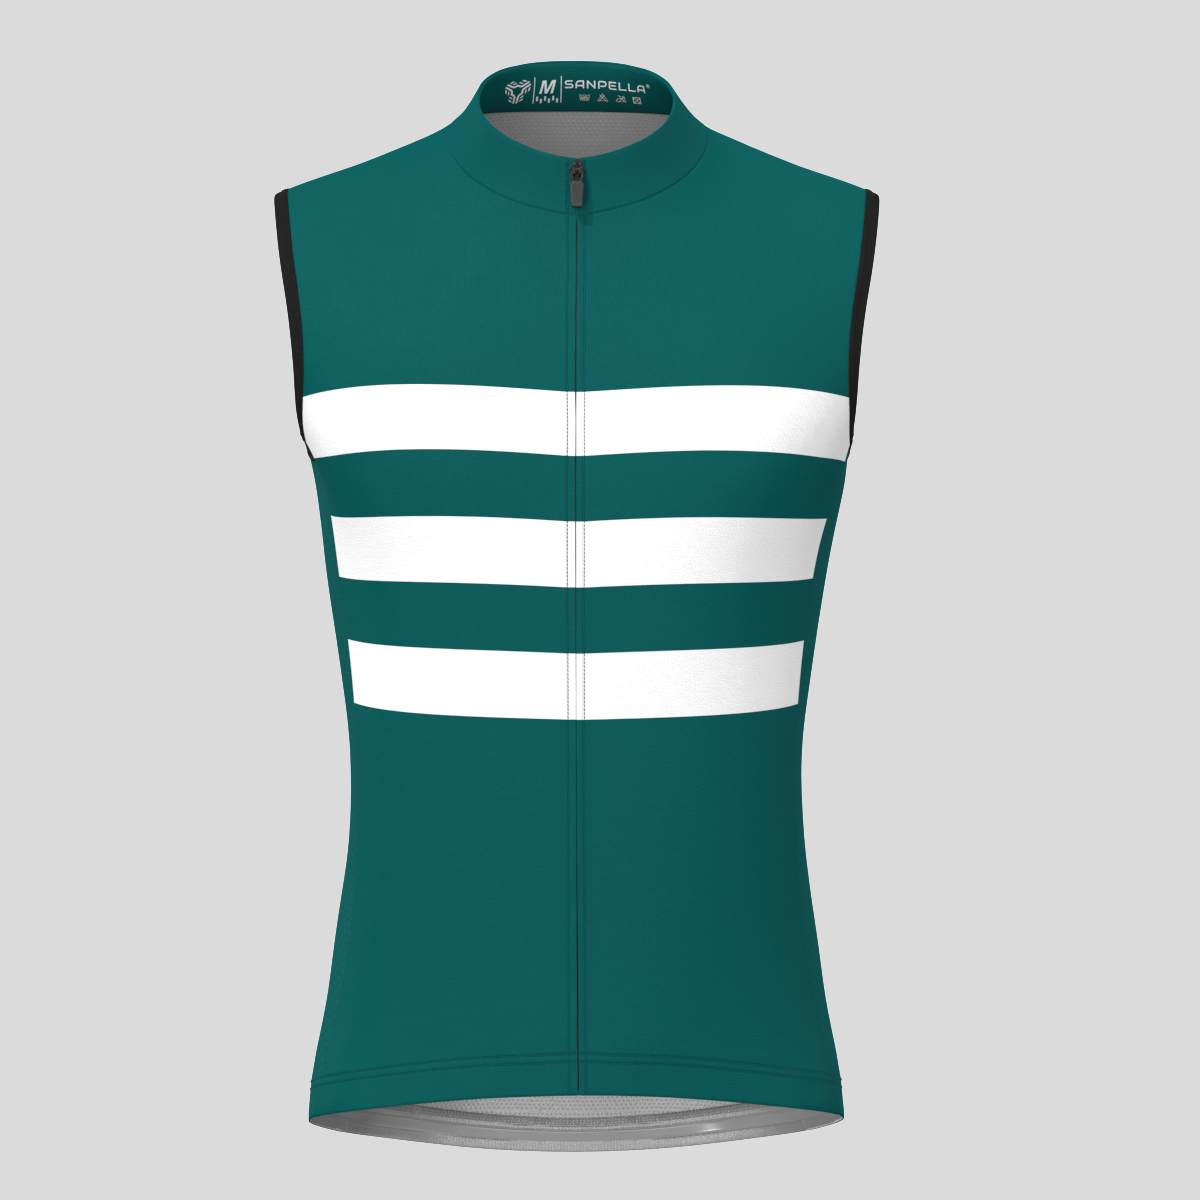 Men's Classic Stripes Cycling Jersey - Midnight/White